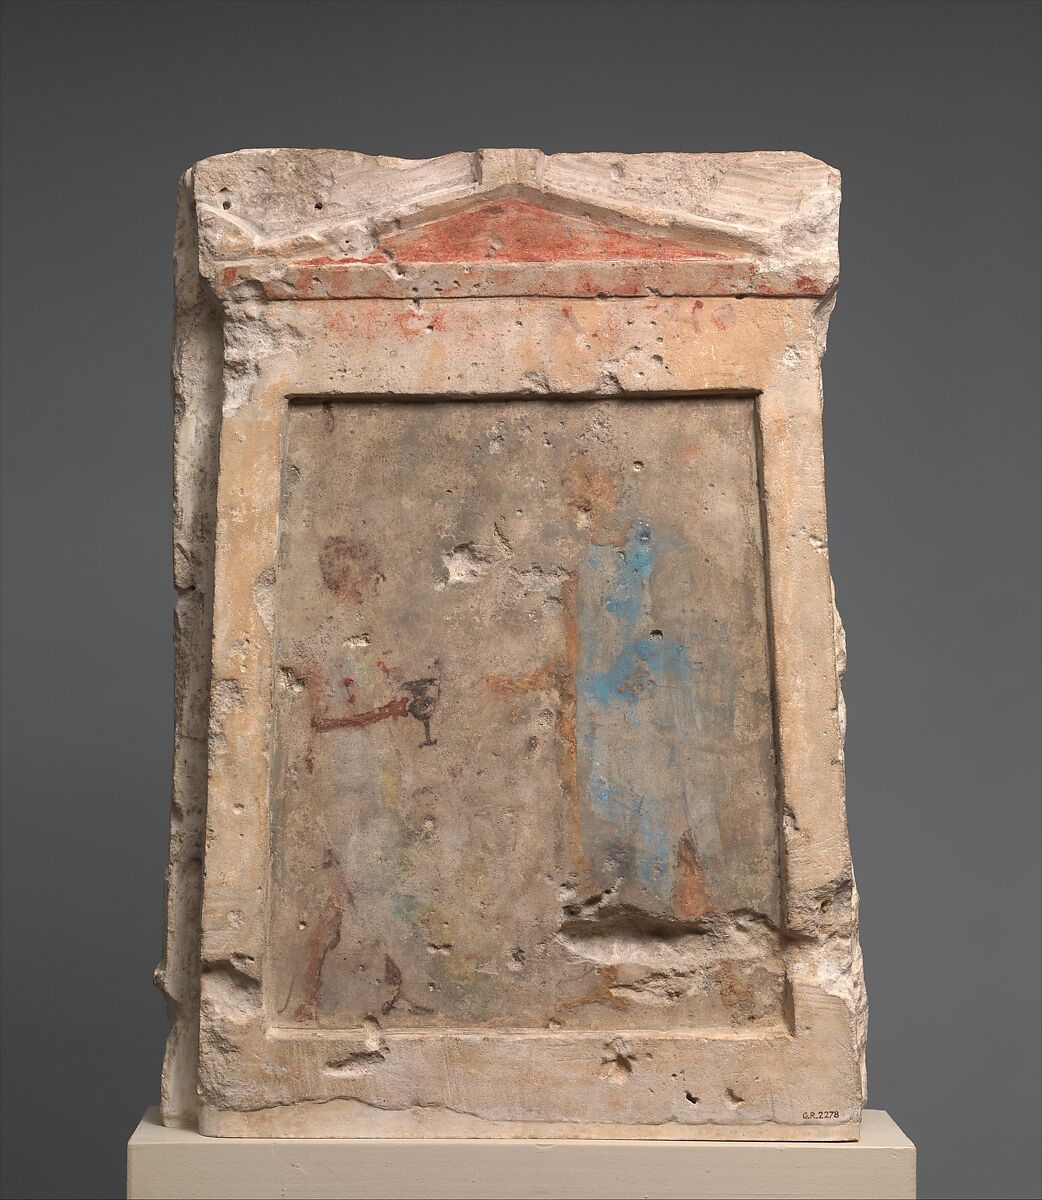 Painted limestone funerary slab with a soldier taking a kantharos from his attendant, Limestone, paint, Greek 